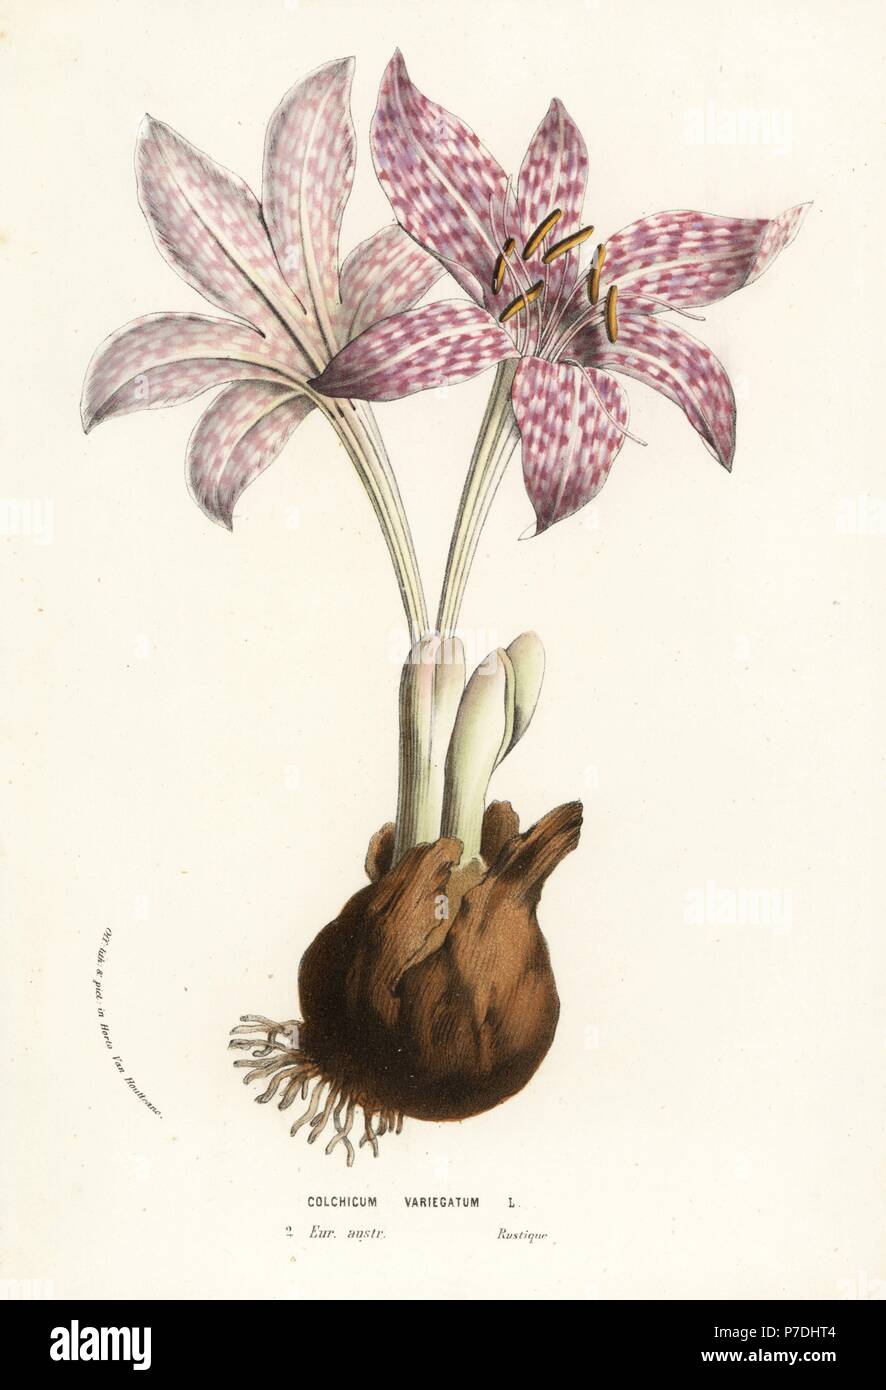 Variegated meadow saffron, Colchicum variegatum. Handcoloured lithograph from Louis van Houtte and Charles Lemaire's Flowers of the Gardens and Hothouses of Europe, Flore des Serres et des Jardins de l'Europe, Ghent, Belgium, 1856. Stock Photo